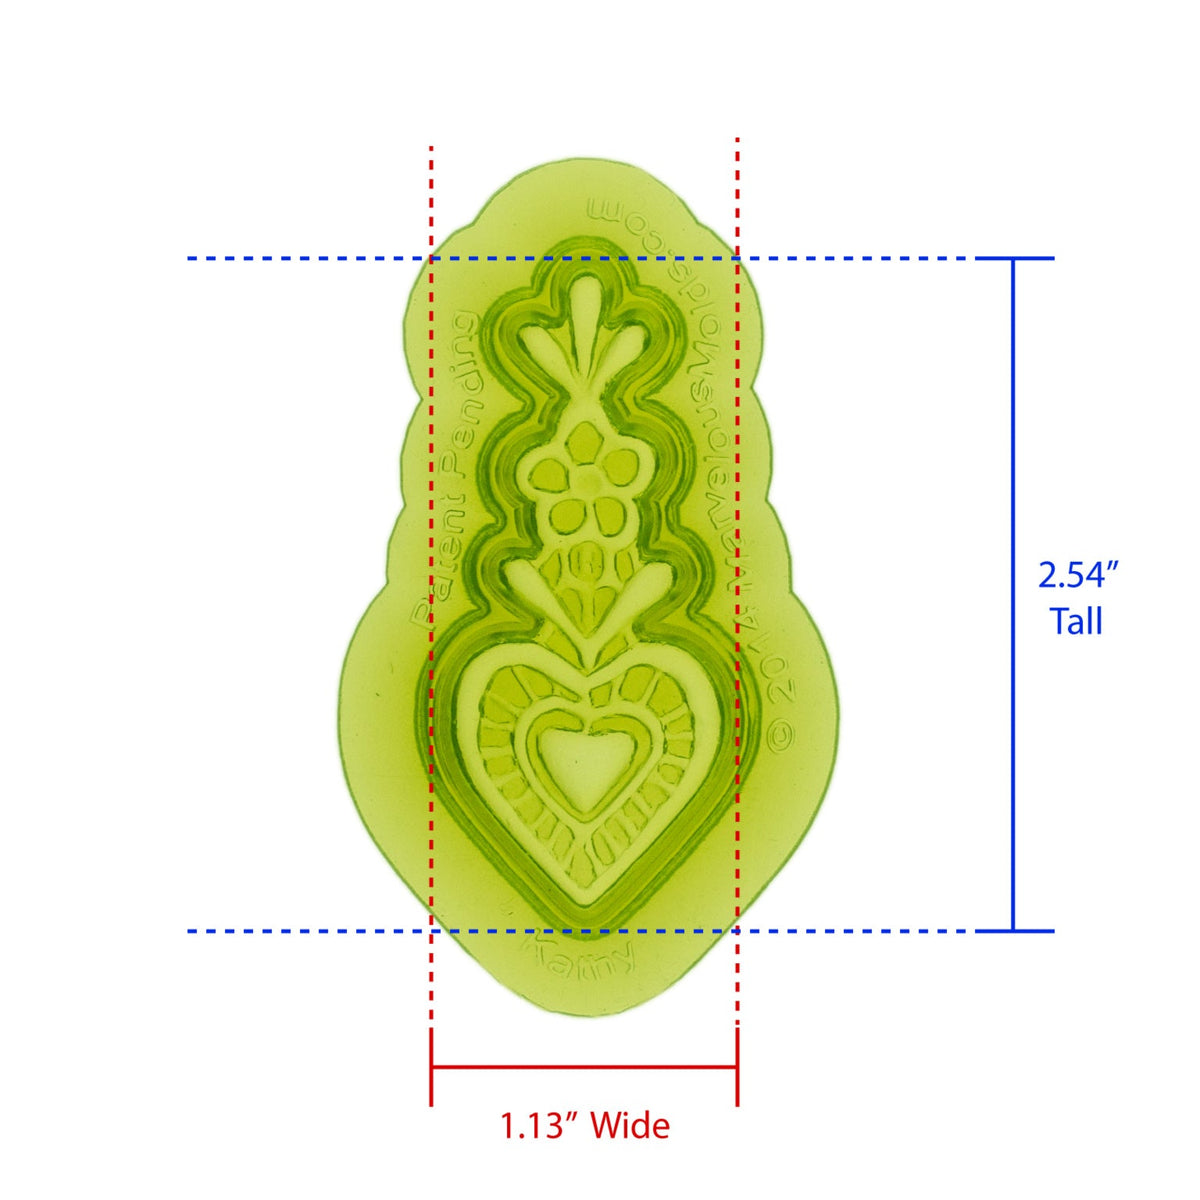 Kathy Lace Silicone Mold Cavity measures 1.13 inches Wide by 2.54 inches Tall, proudly Made in USA